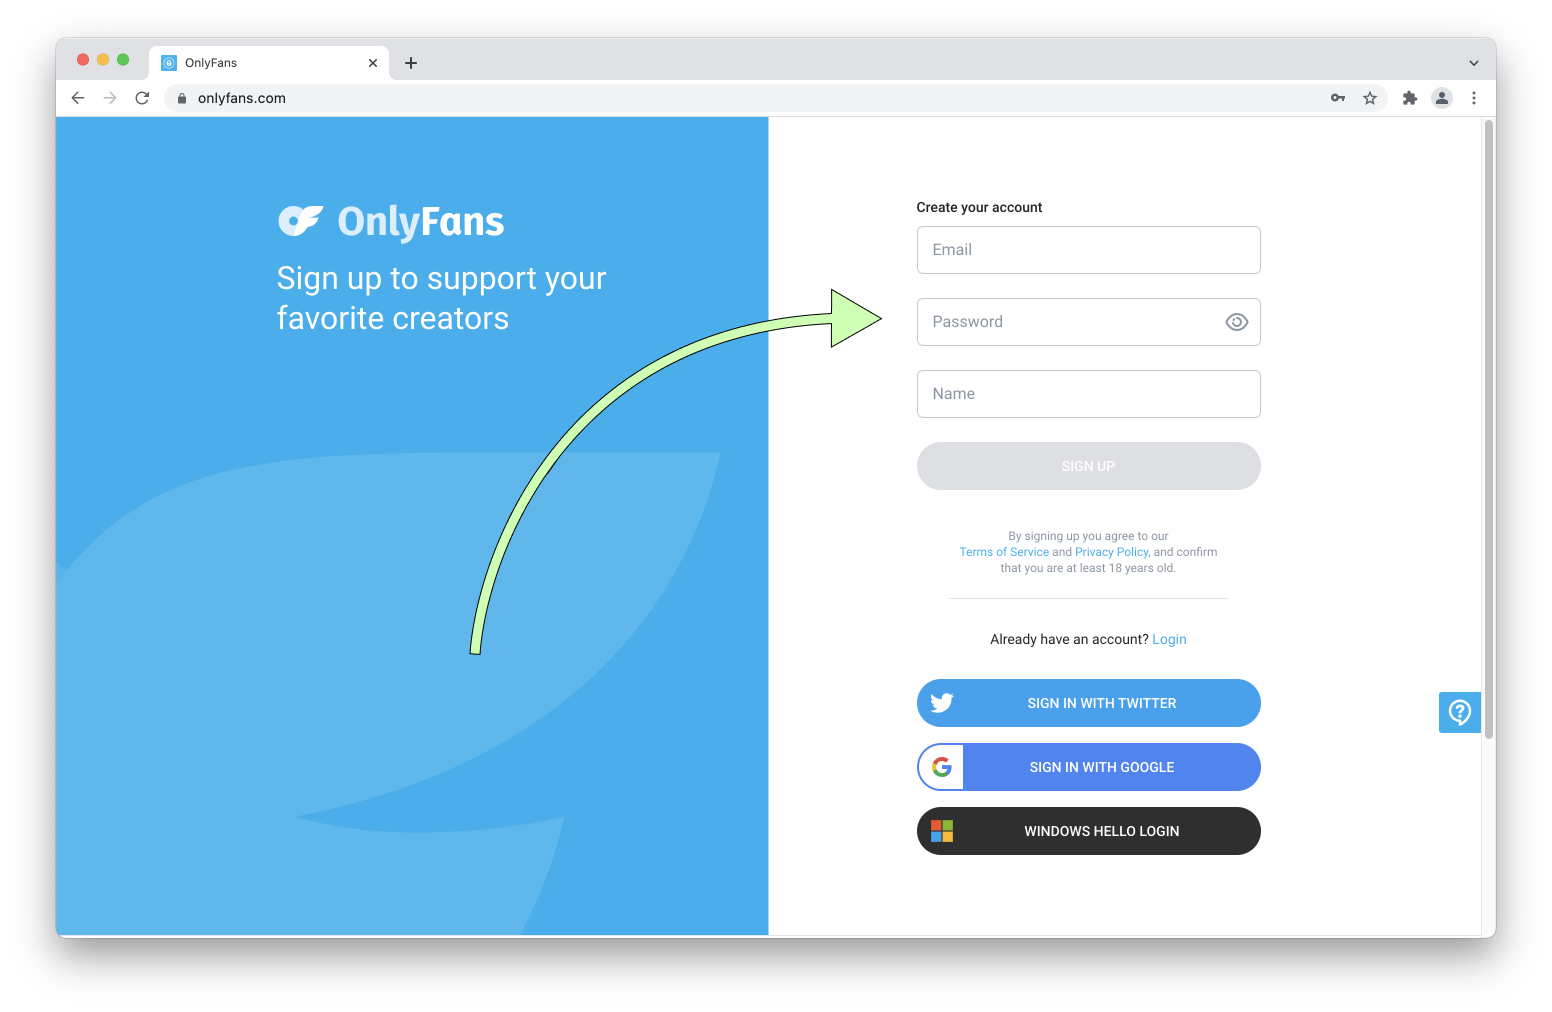 How to reactivate an onlyfans account